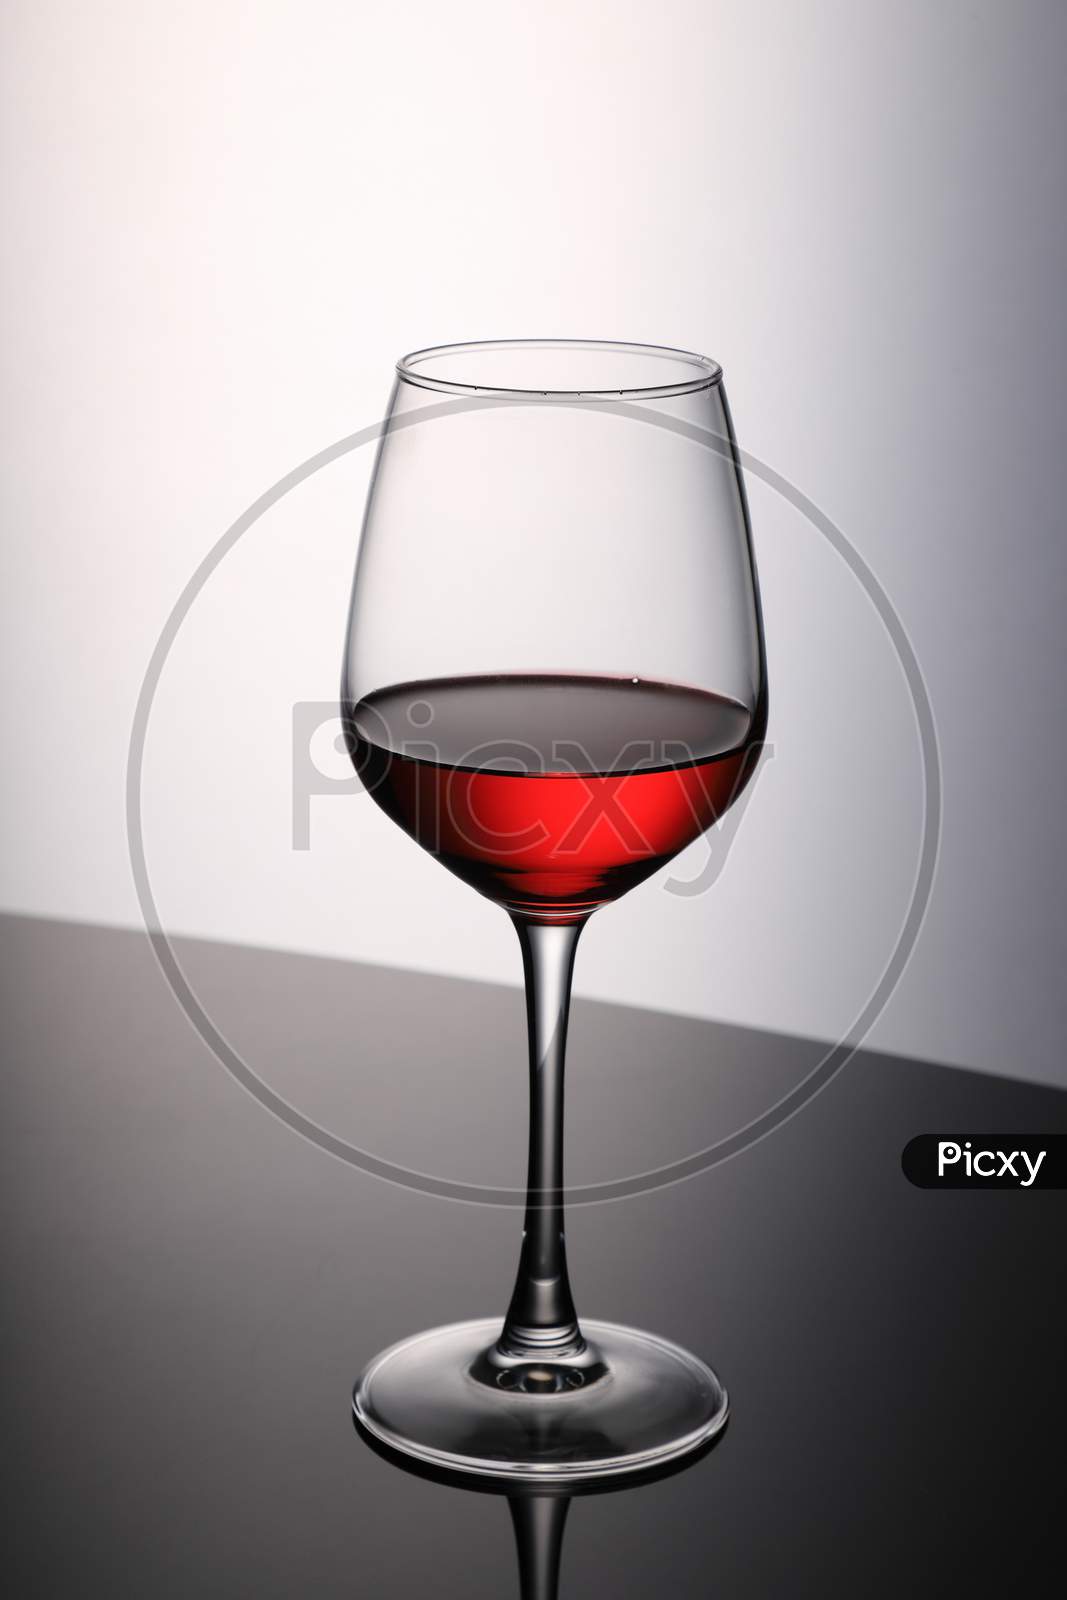 Red Wine Glass On Black Table And White Background